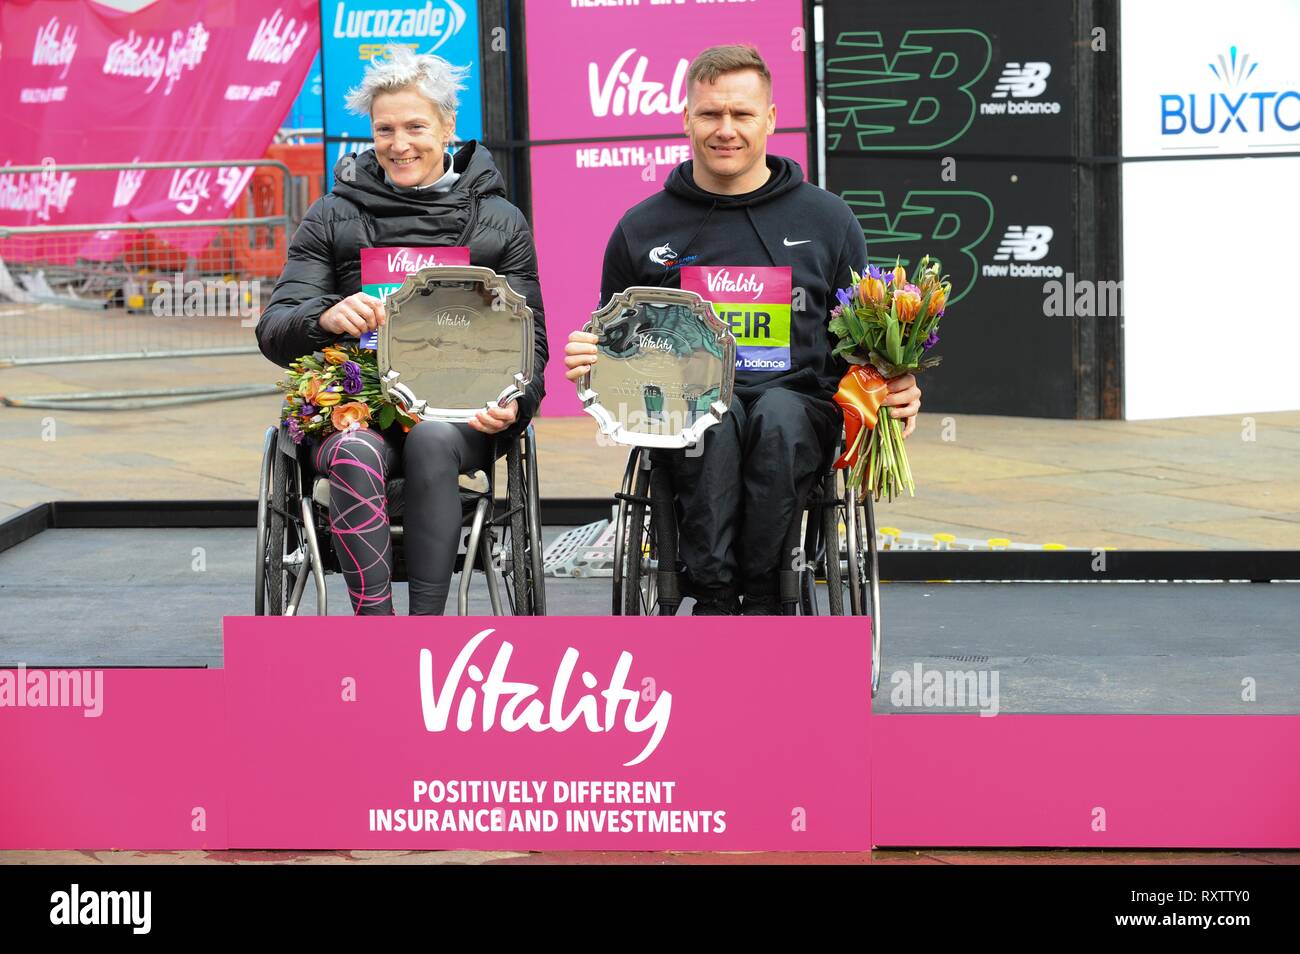 Margaret Van Den Broek and David Weir are seen posing with their awards after running The Vitality Big Half, which has returned for a festival of running and culture to the heart of London in a celebration of the rich and wonderful diversity of the capital city and Finishing it at Cutty Sark. Stock Photo